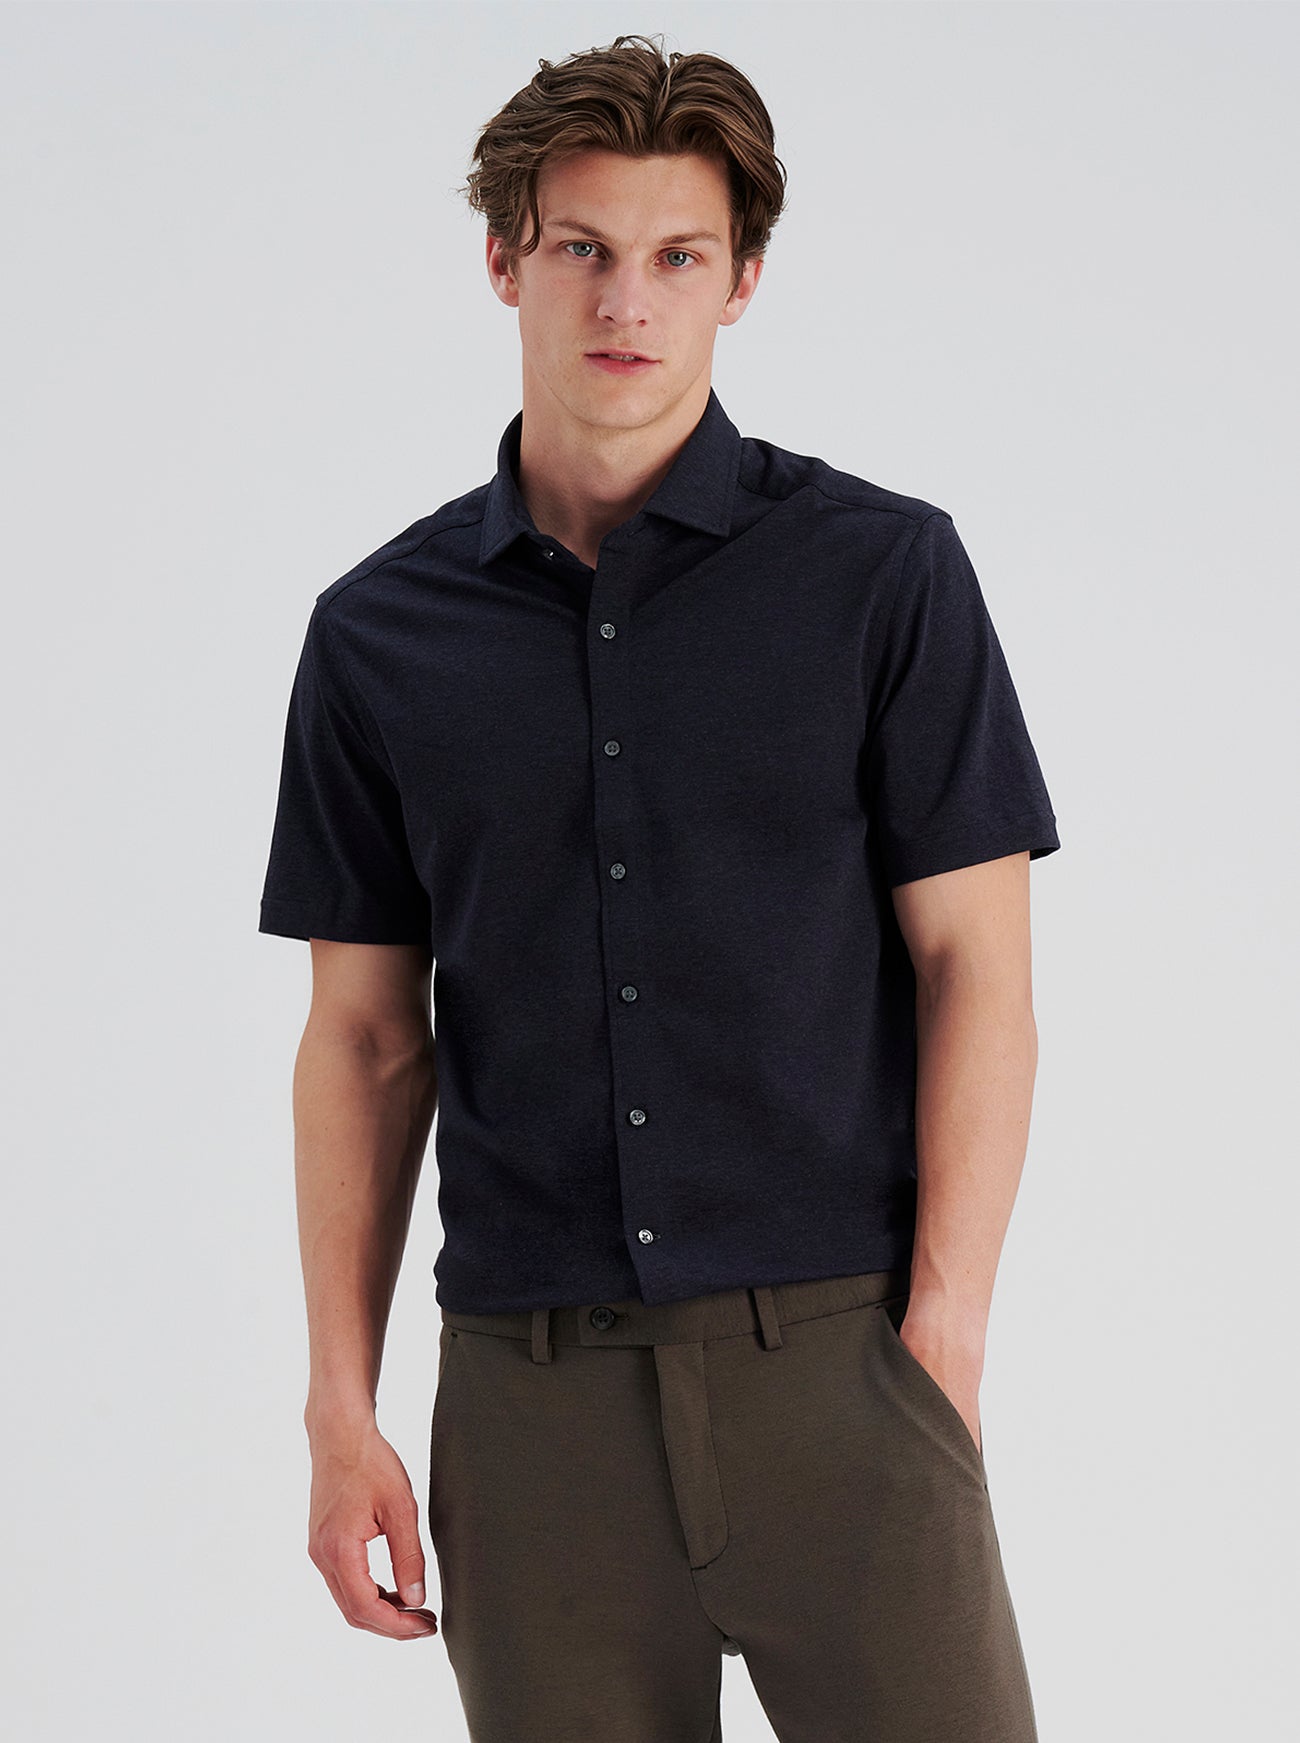 Slim Shirt With Micro Design - Men - Ready-to-Wear